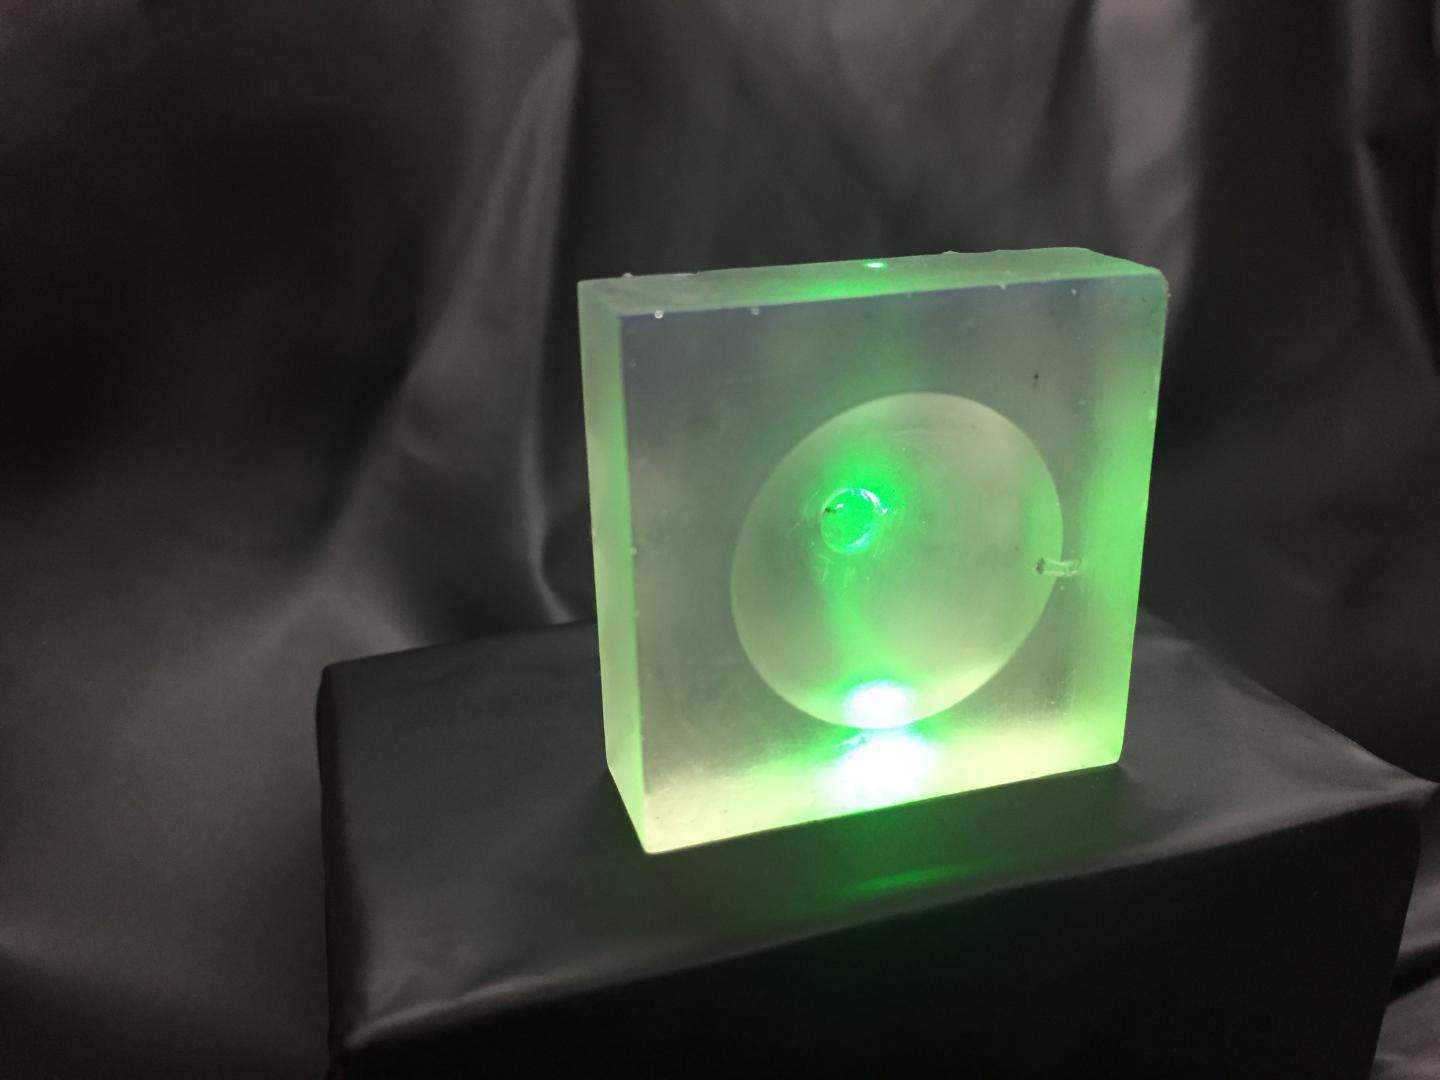 The 3D printed lenses generate enhanced ultrasound or photoacoustic waves which current ultrasound machines are unable to do